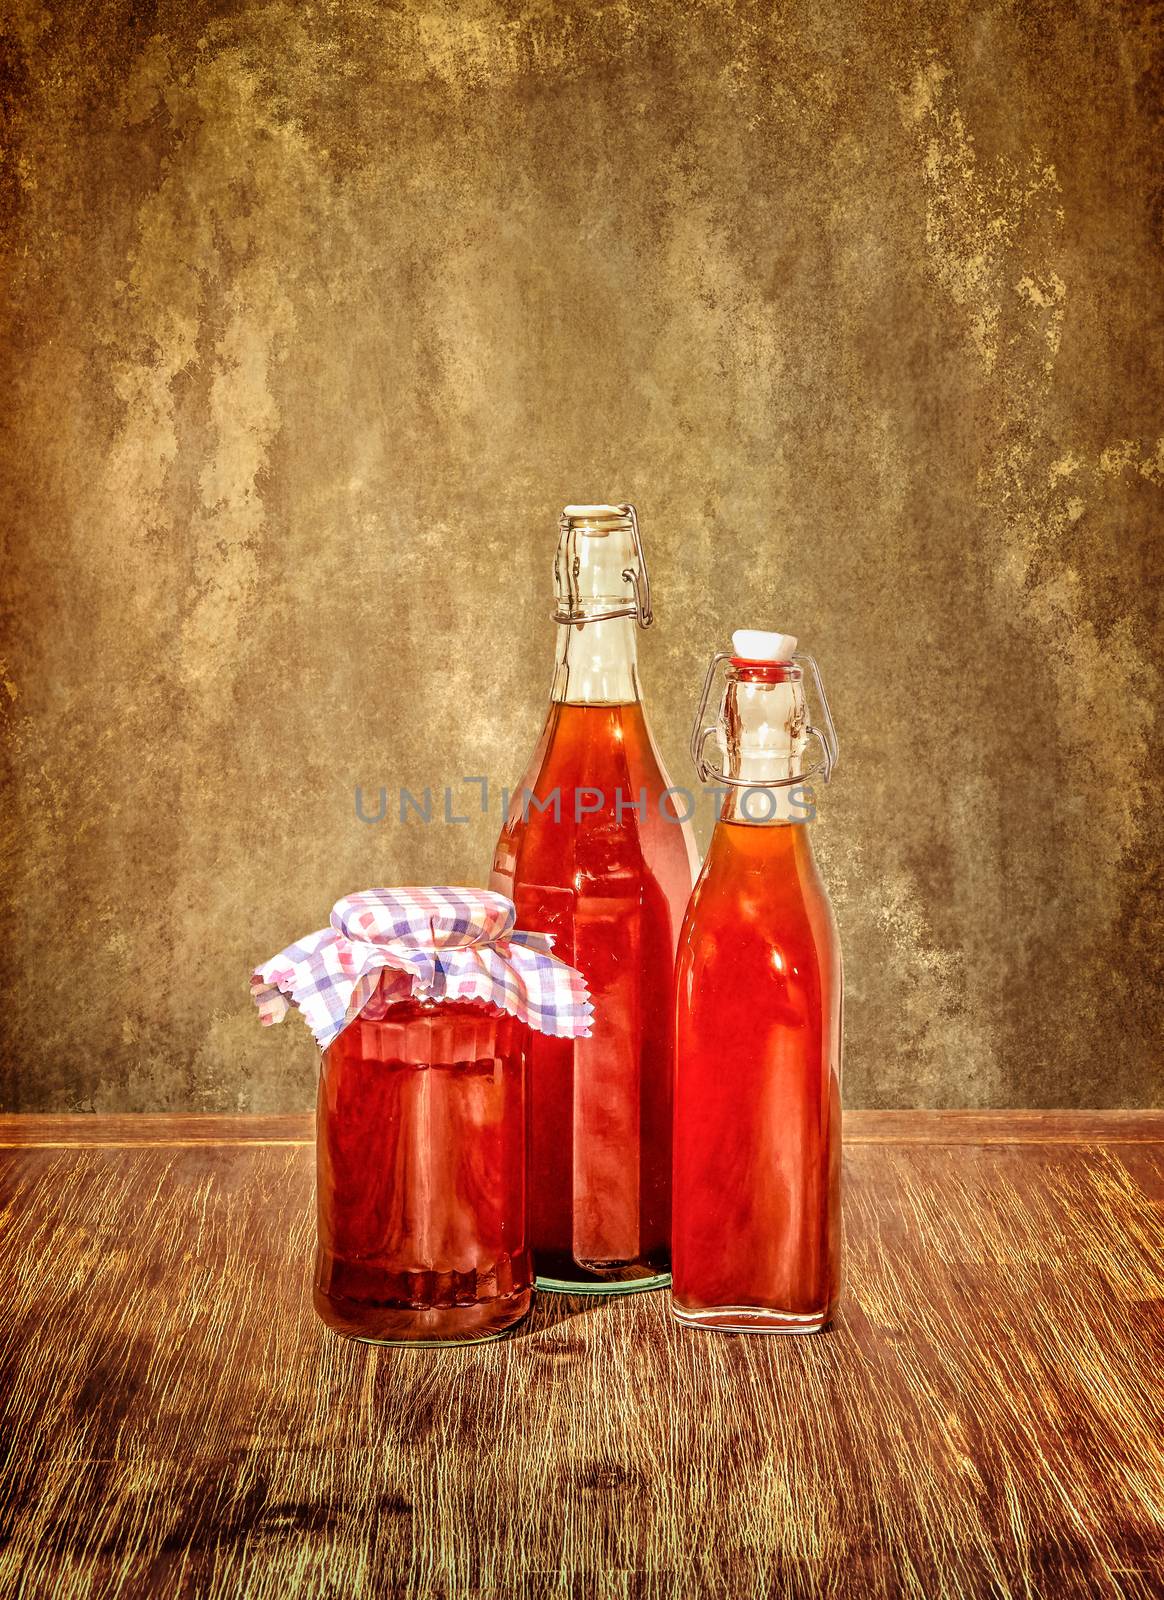 Bottles filled with yellow syrup and jam on kitchen table by martinm303